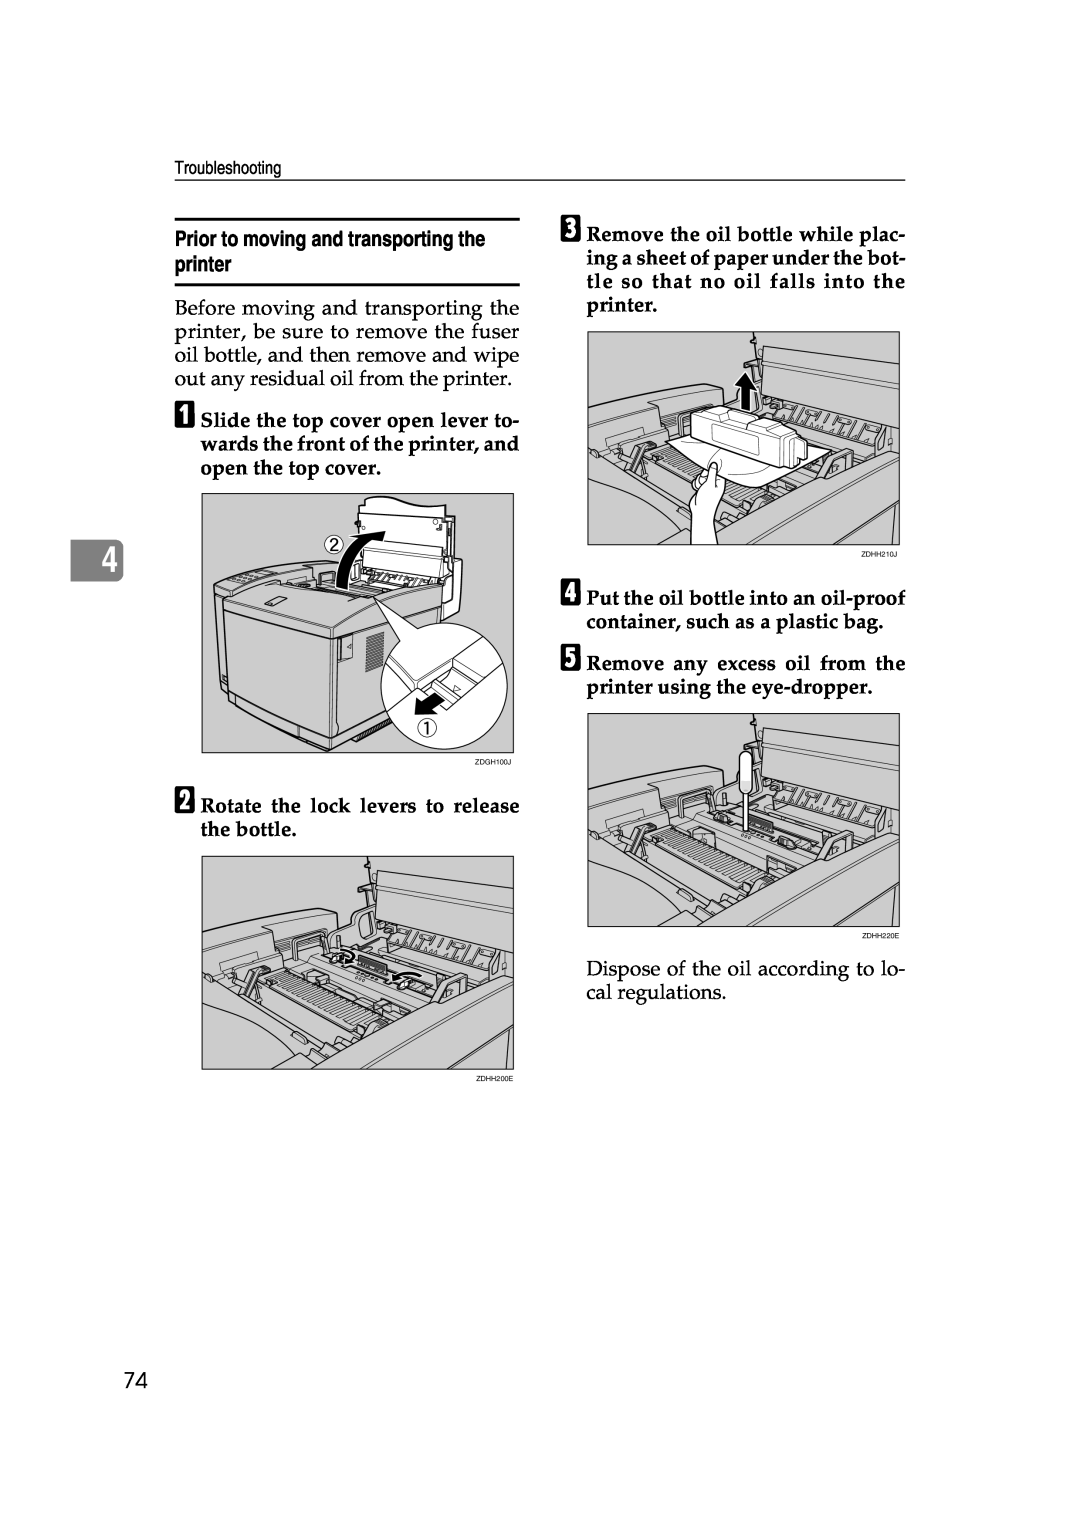 Lanier AP206 manual Prior to moving and transporting the printer, B Rotate the lock levers to release the bottle 